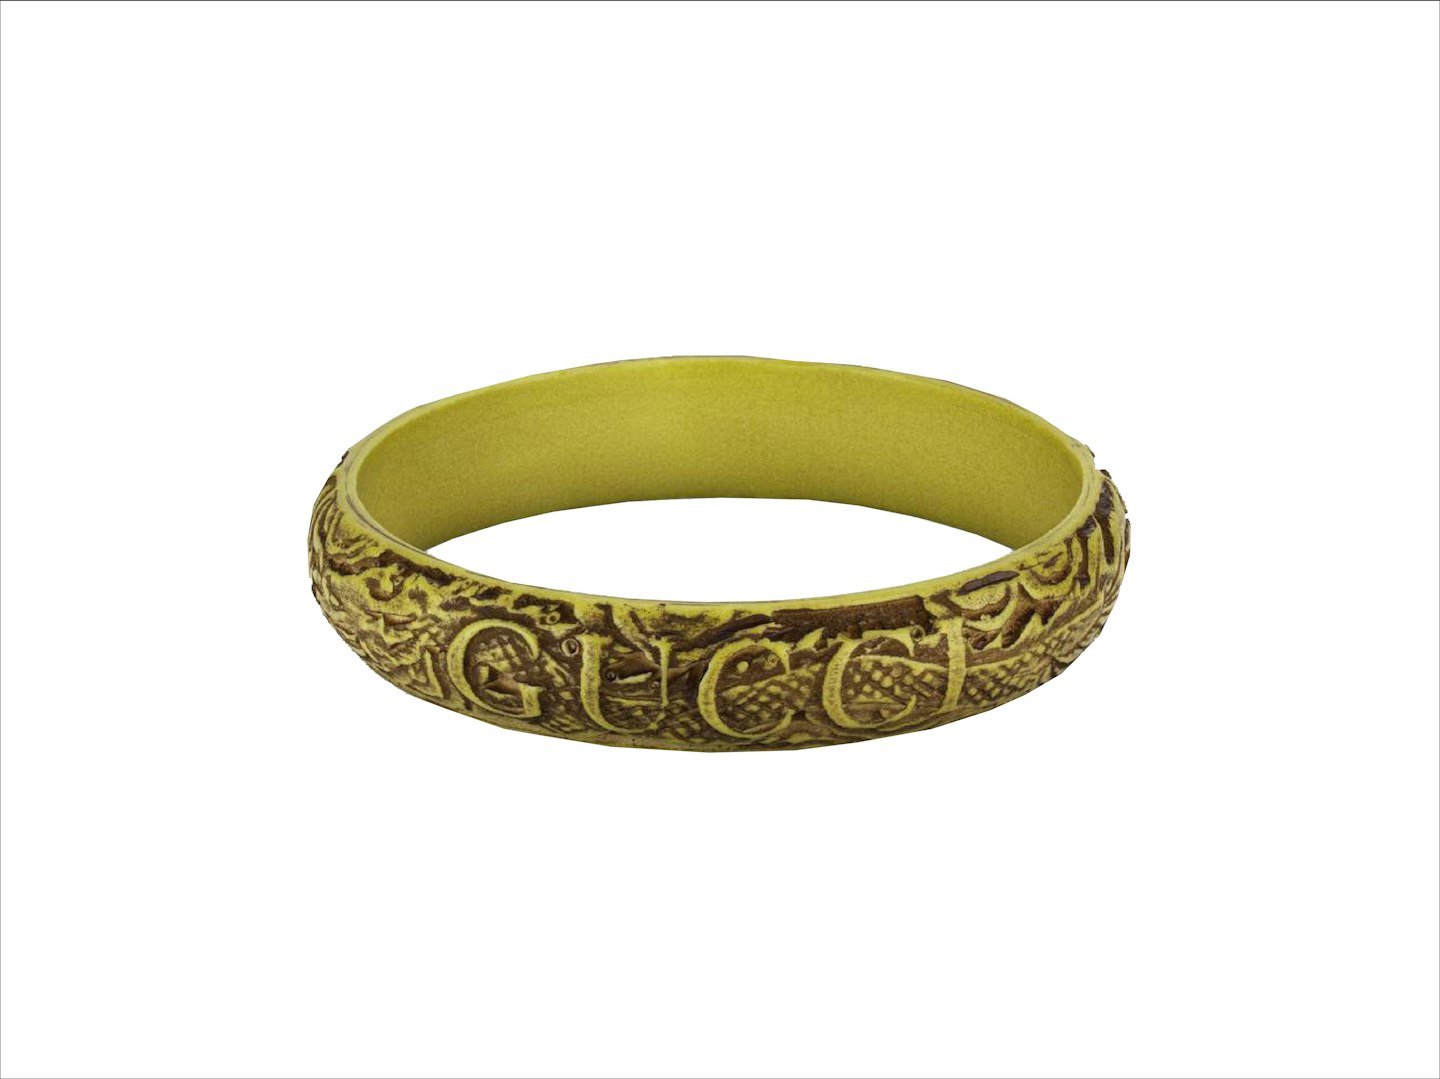 Gucci Bracelet With Engraved Leaves from Gucci